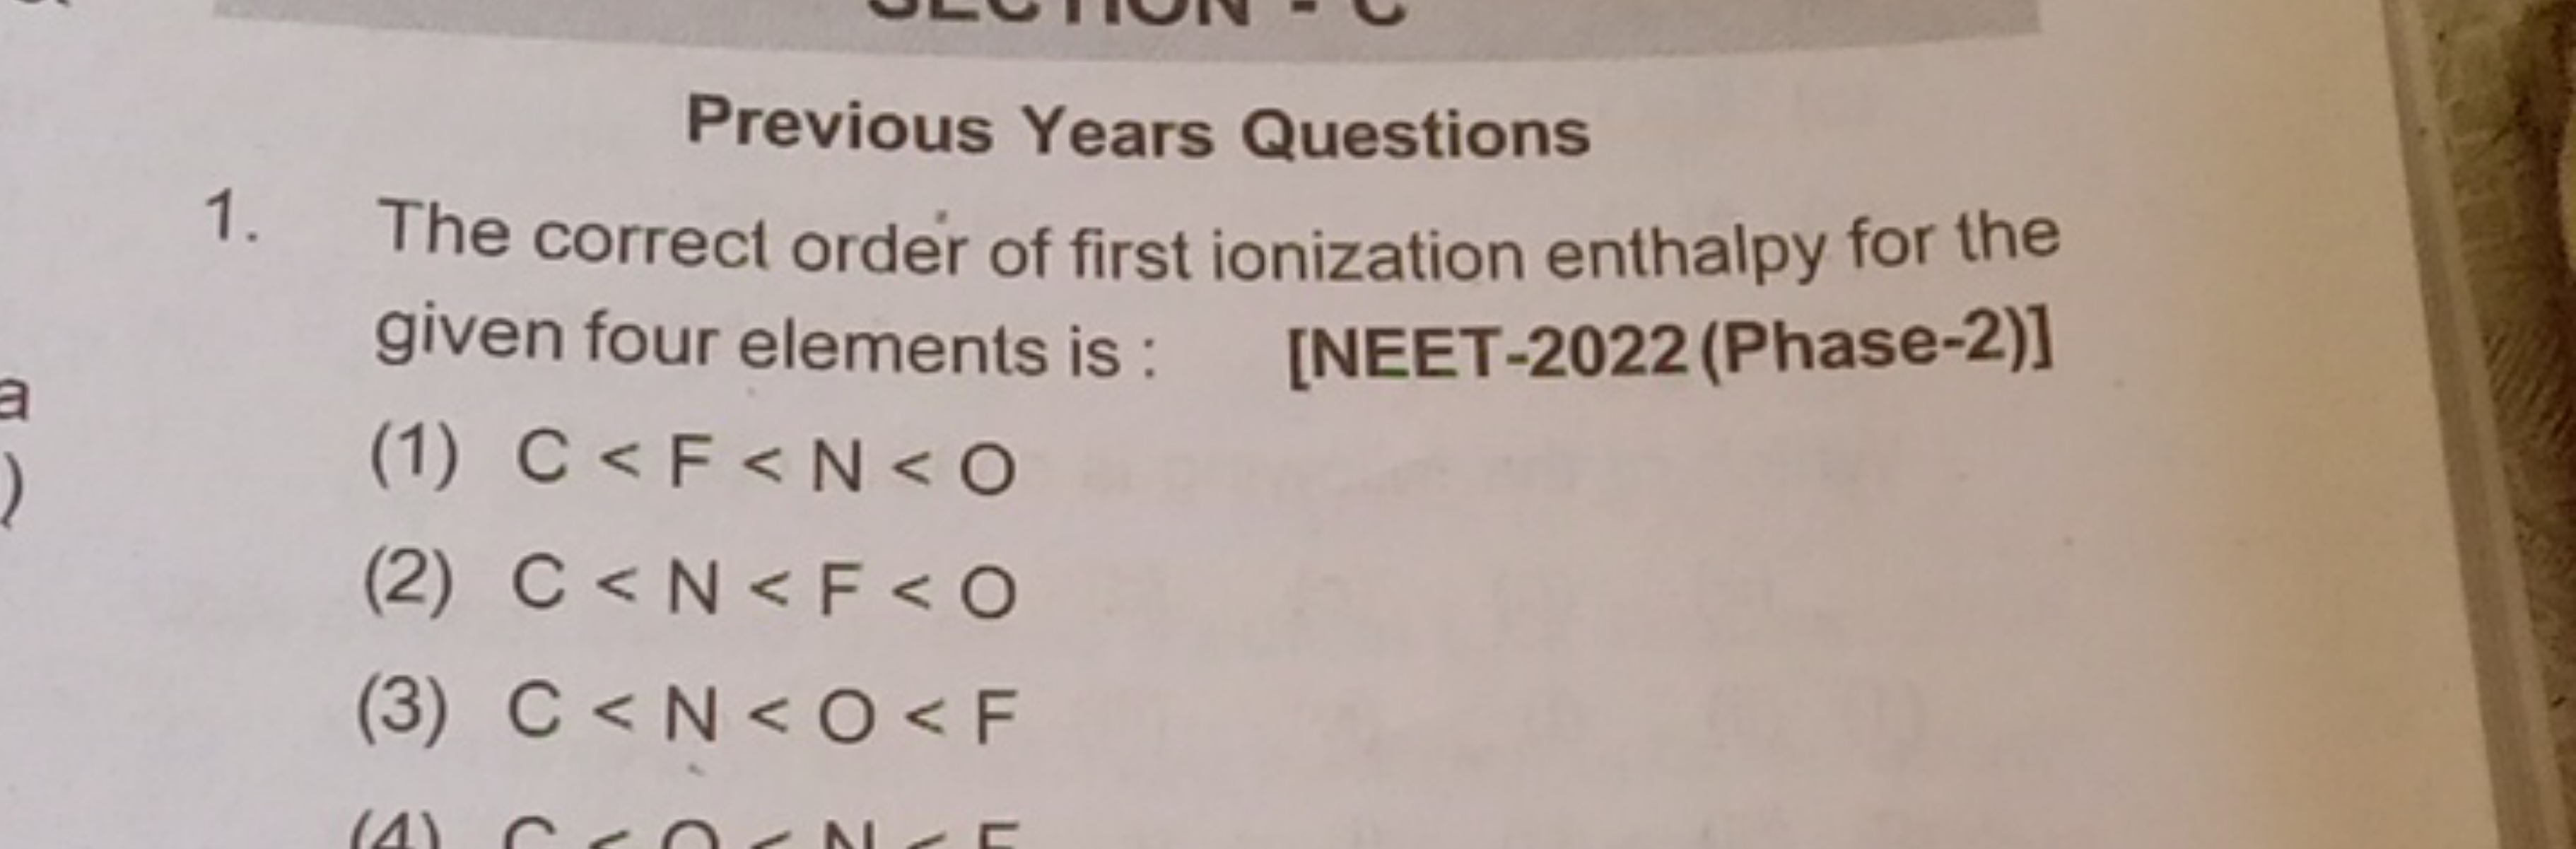 Previous Years Questions
1. The correct order of first ionization enth